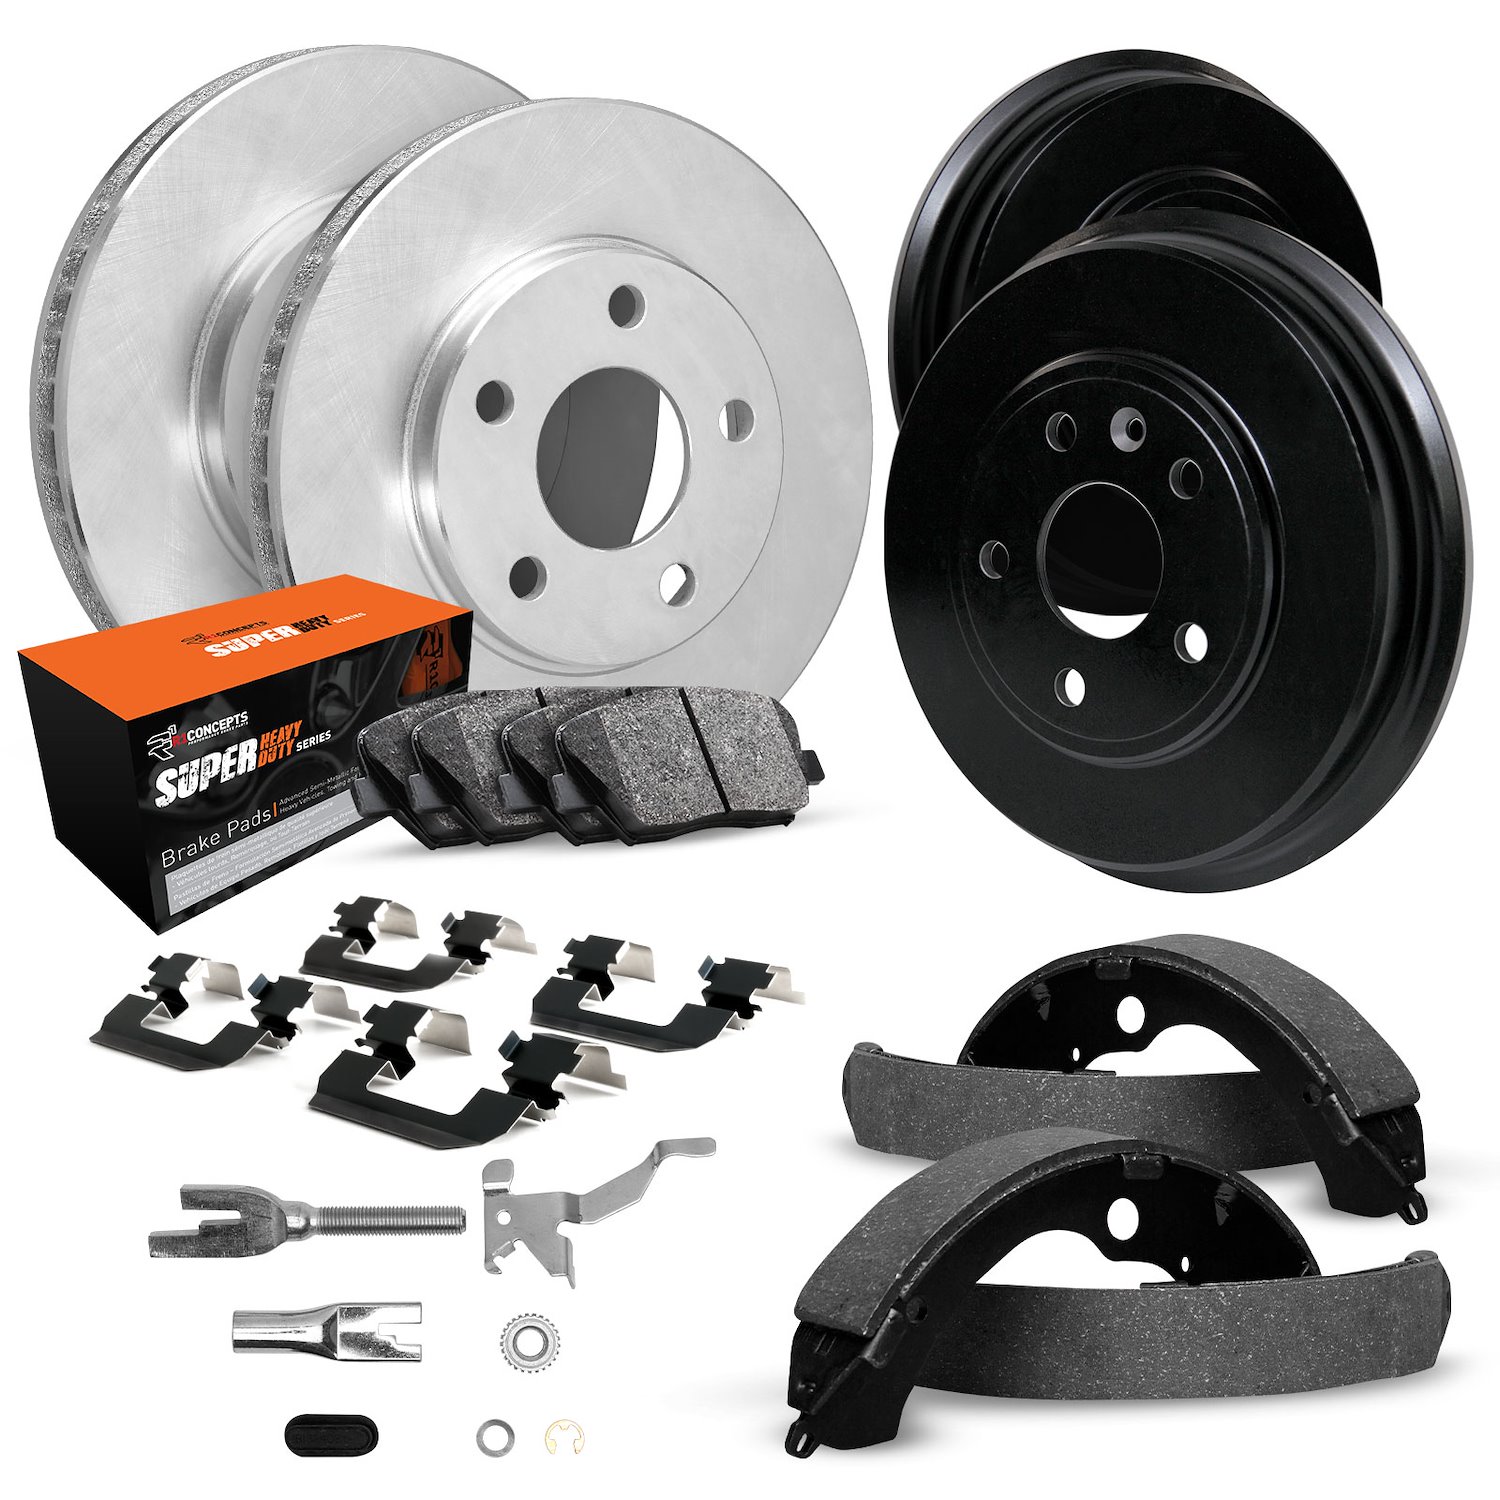 E-Line Blank Brake Rotor & Drum Set w/Super-Duty Pads, Shoes, Hardware, & Adjusters, 1974-1975 GM, Position: Front & Rear